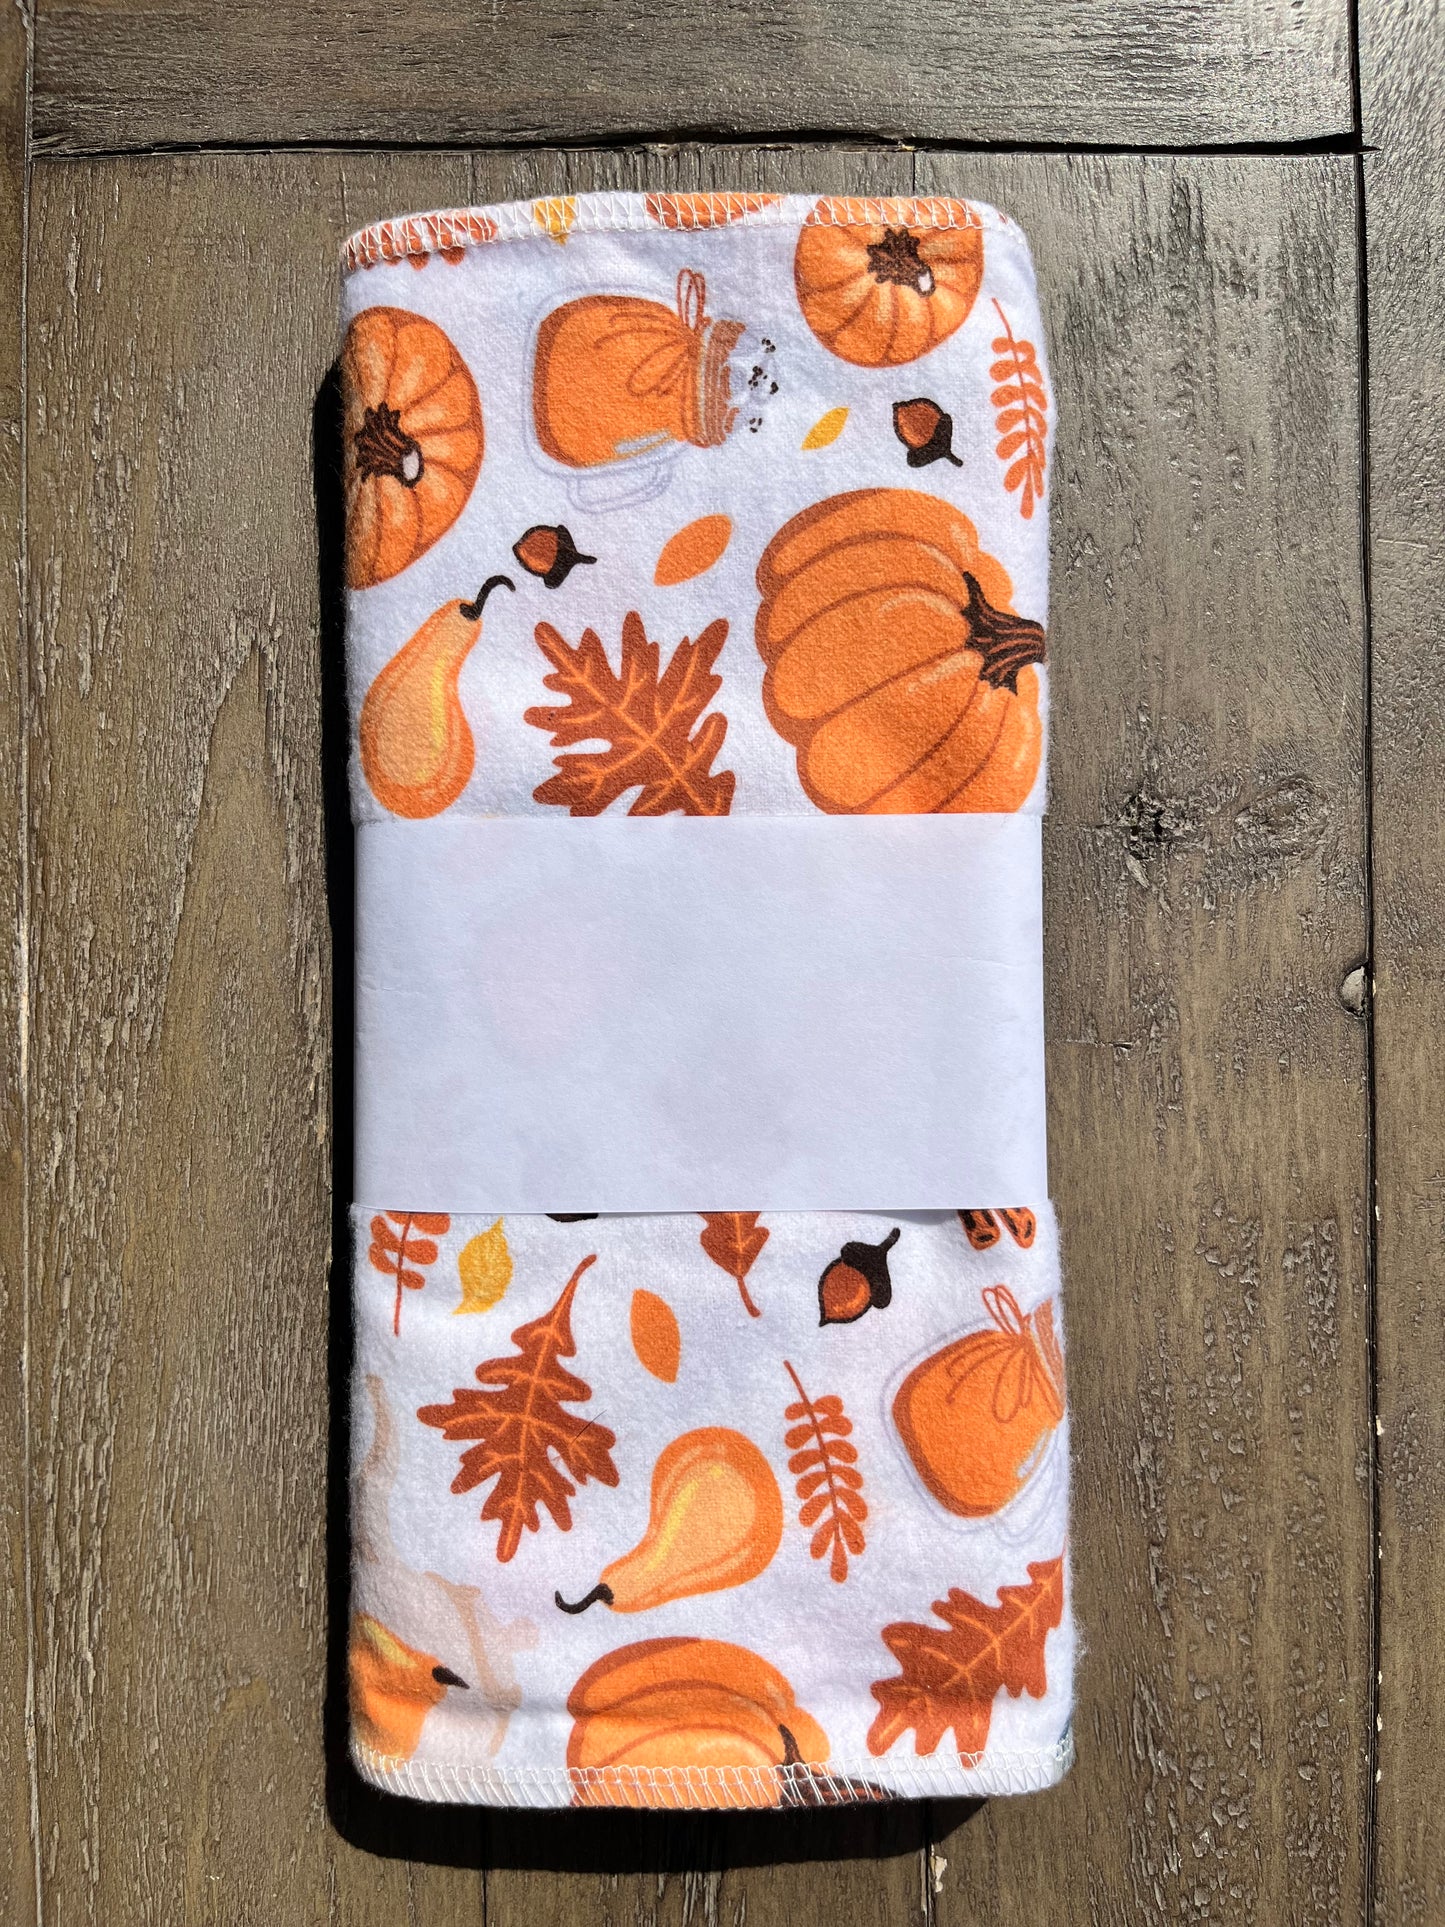 Fall Pumpkin Set of 12 One Ply Non-Paper Towels 10x12